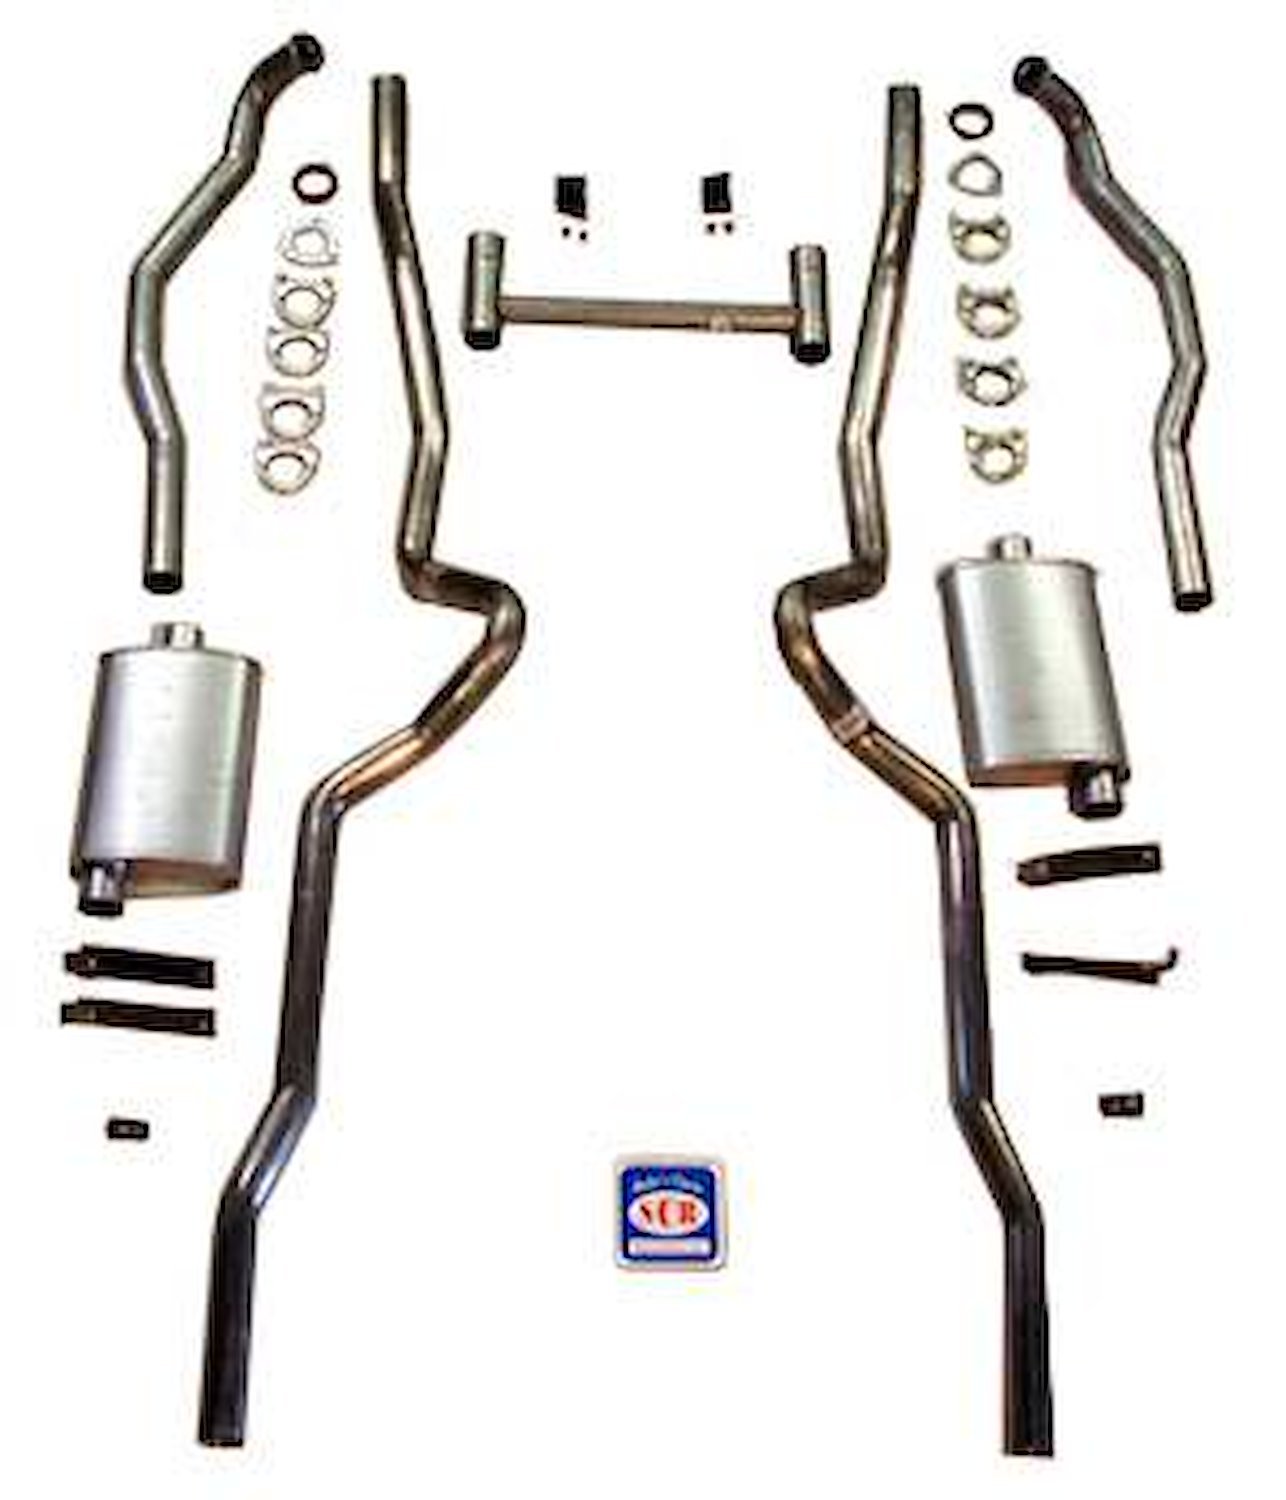 63031-R Dual Turbo Exhaust System, 1955-1957 Chevrolet Full-Size, 2-1/2 in.